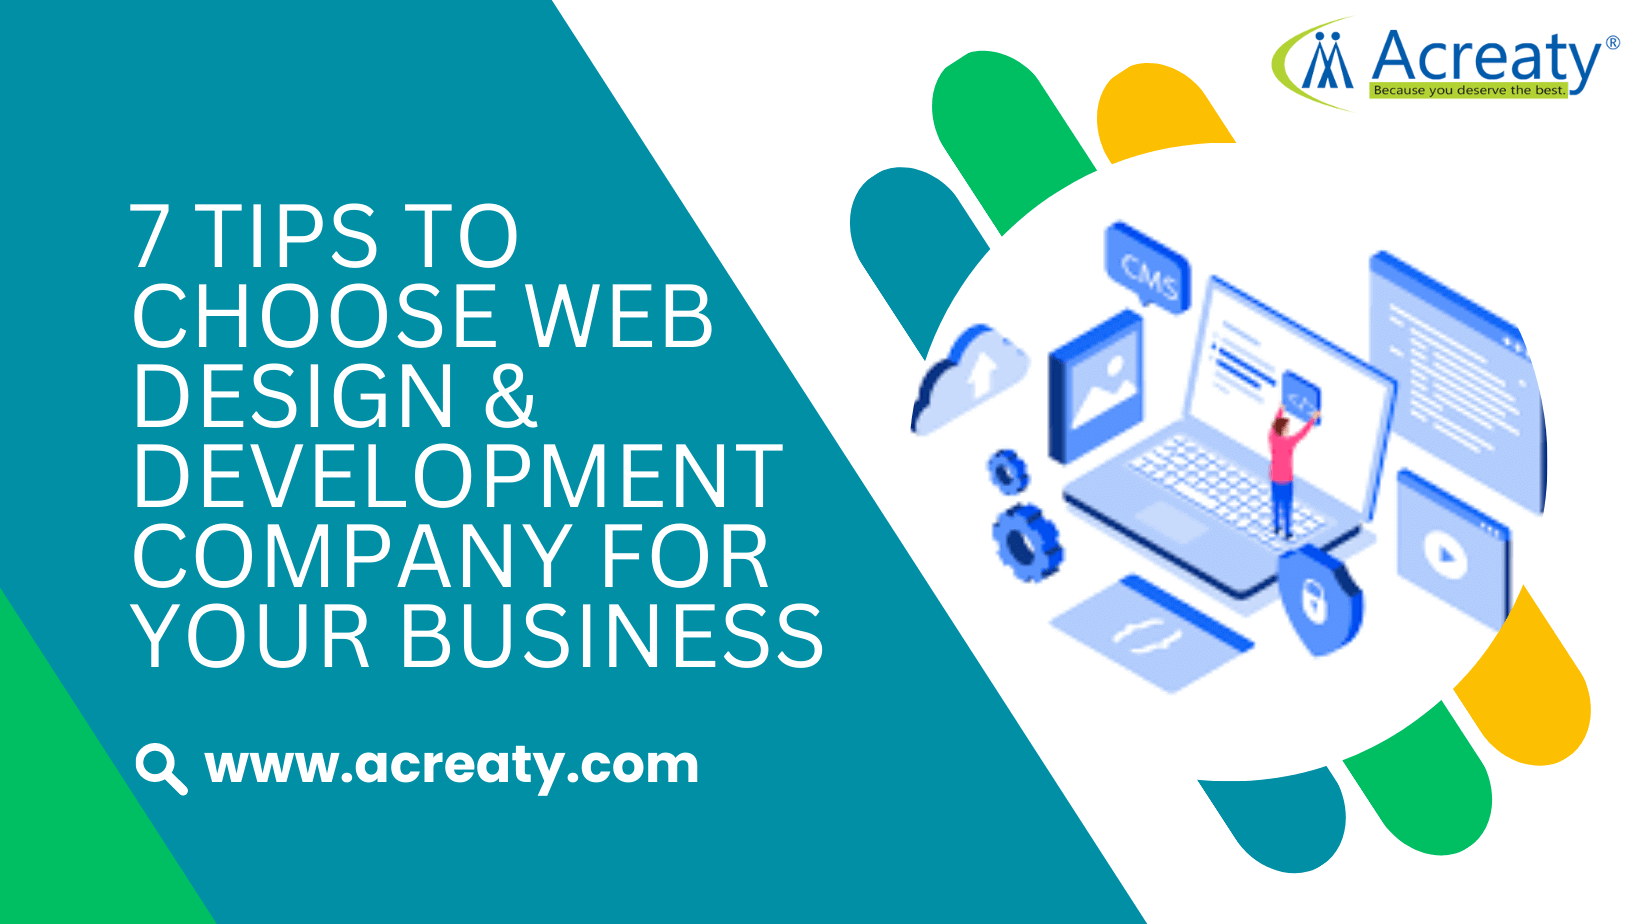 7 Tips to choose Web Design & Development Company for your business